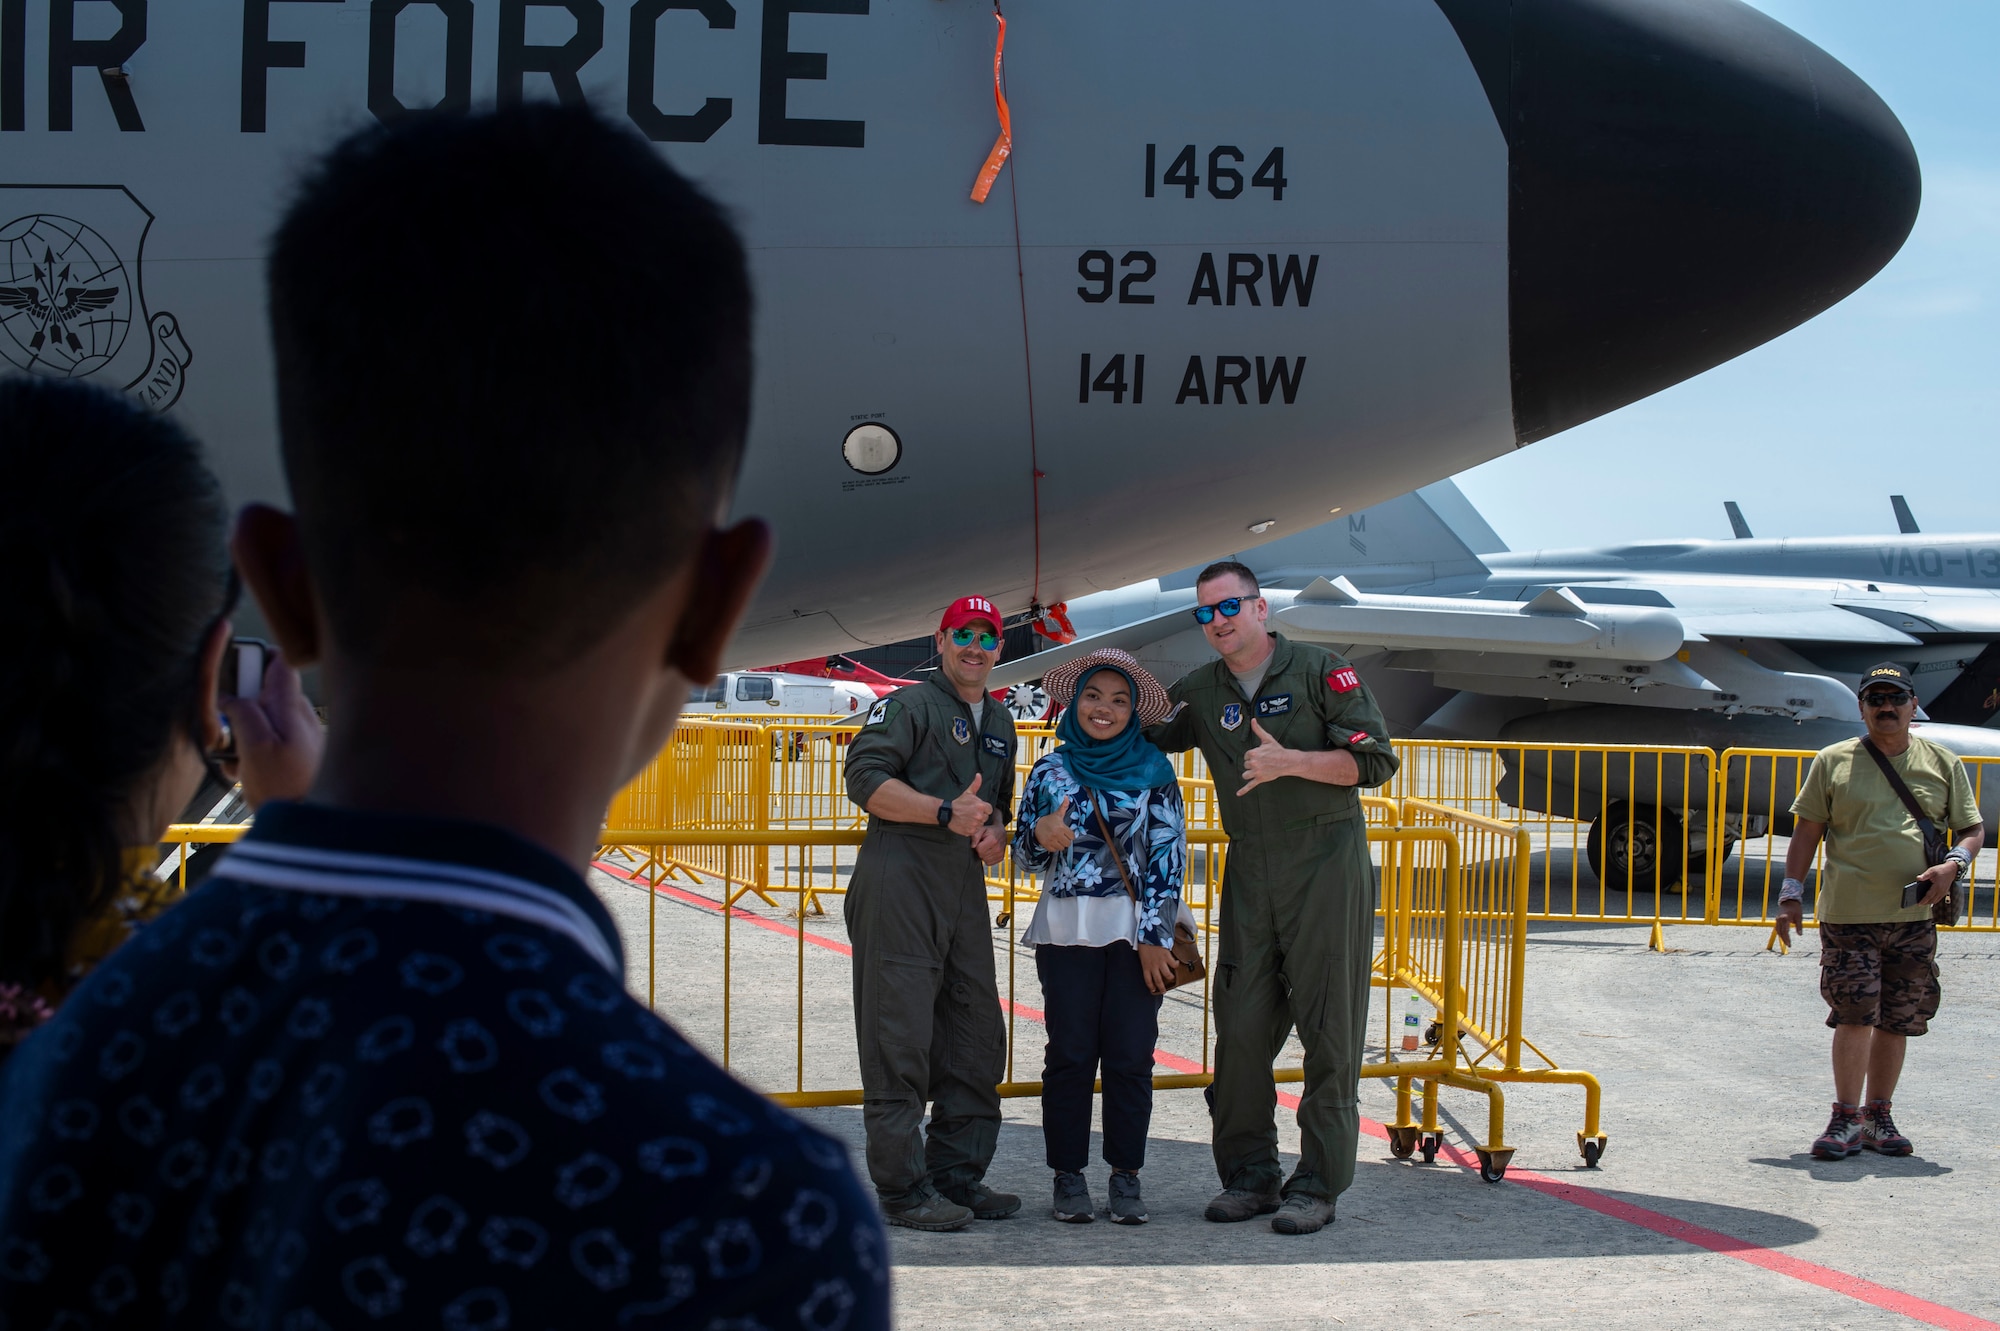 KC-135 Stratotanker aircrew members, assigned to the 92nd Air Refueling Wing, Fairchild Air Force Base, Wash., pose for a photo during the Langkawi International Maritime and Aerospace Exhibition 2019 in Padang Mat Sirat, Malaysia, March 29, 2019.